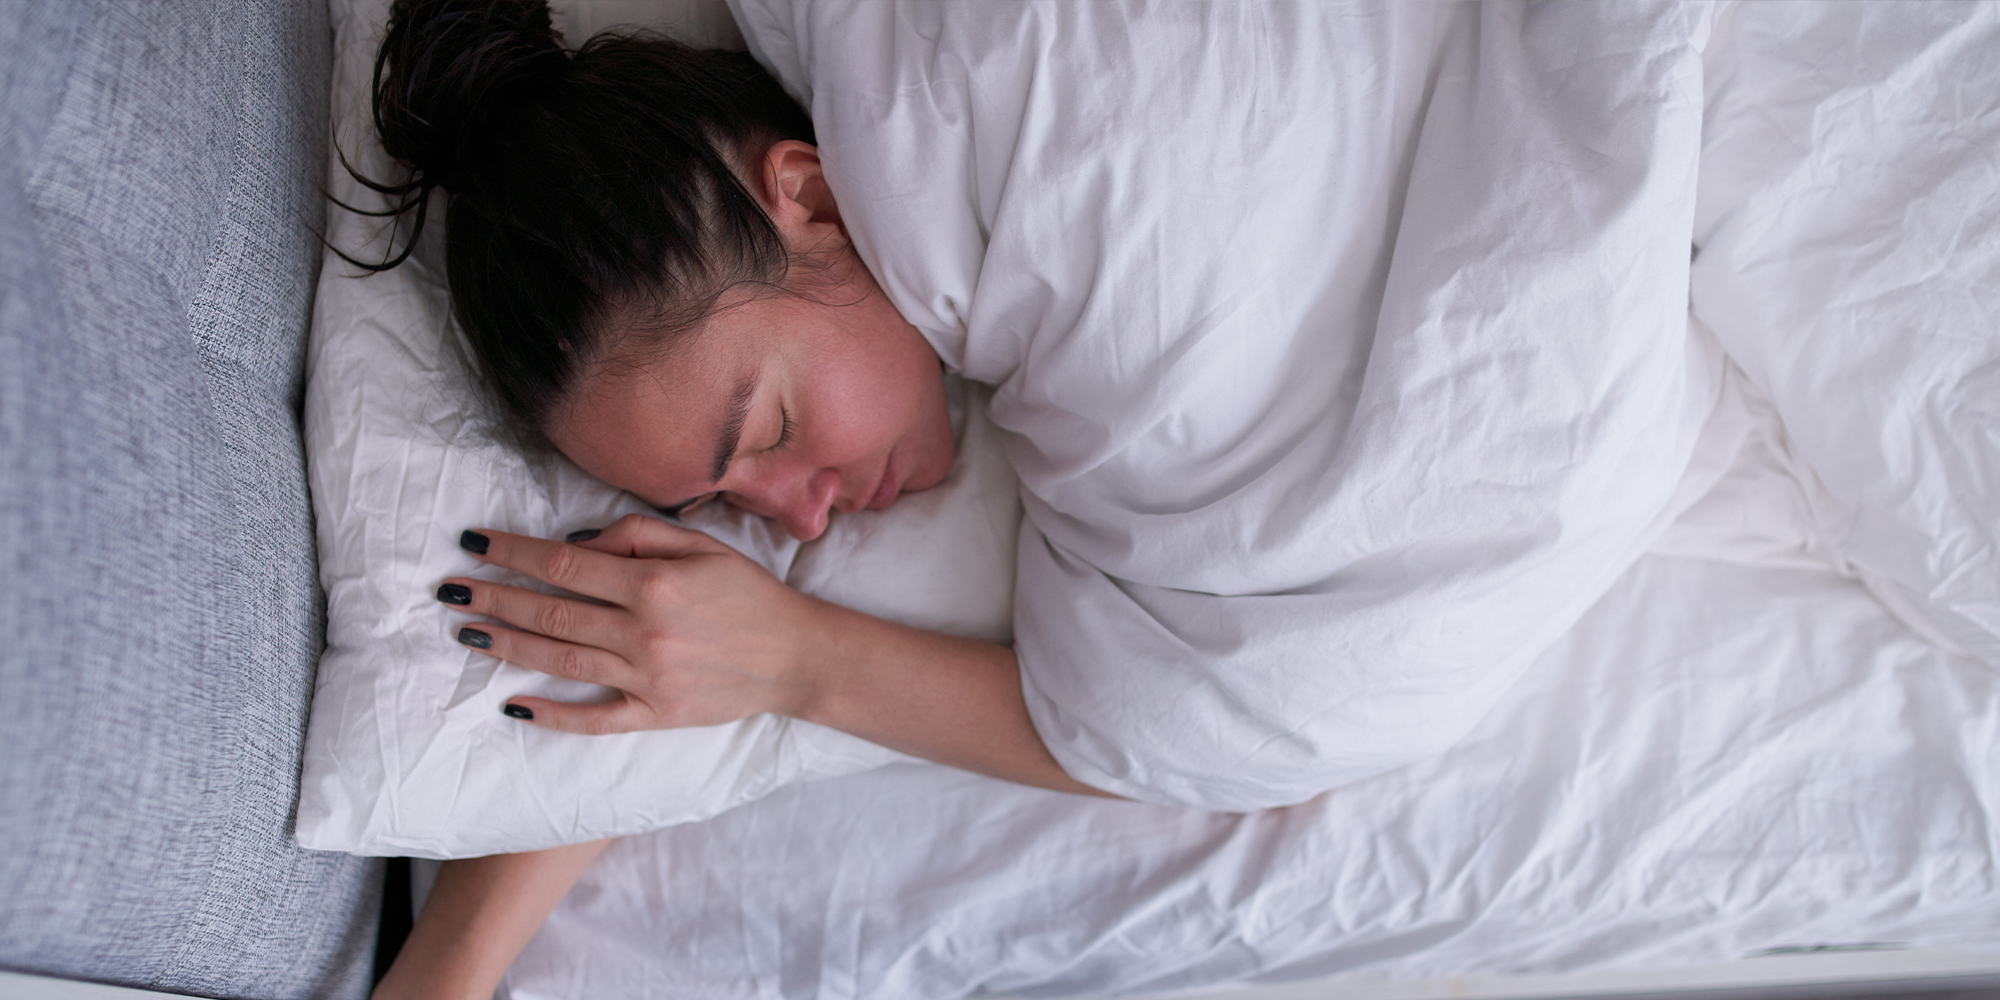 6 sleeping positions and what they reveal about your personality